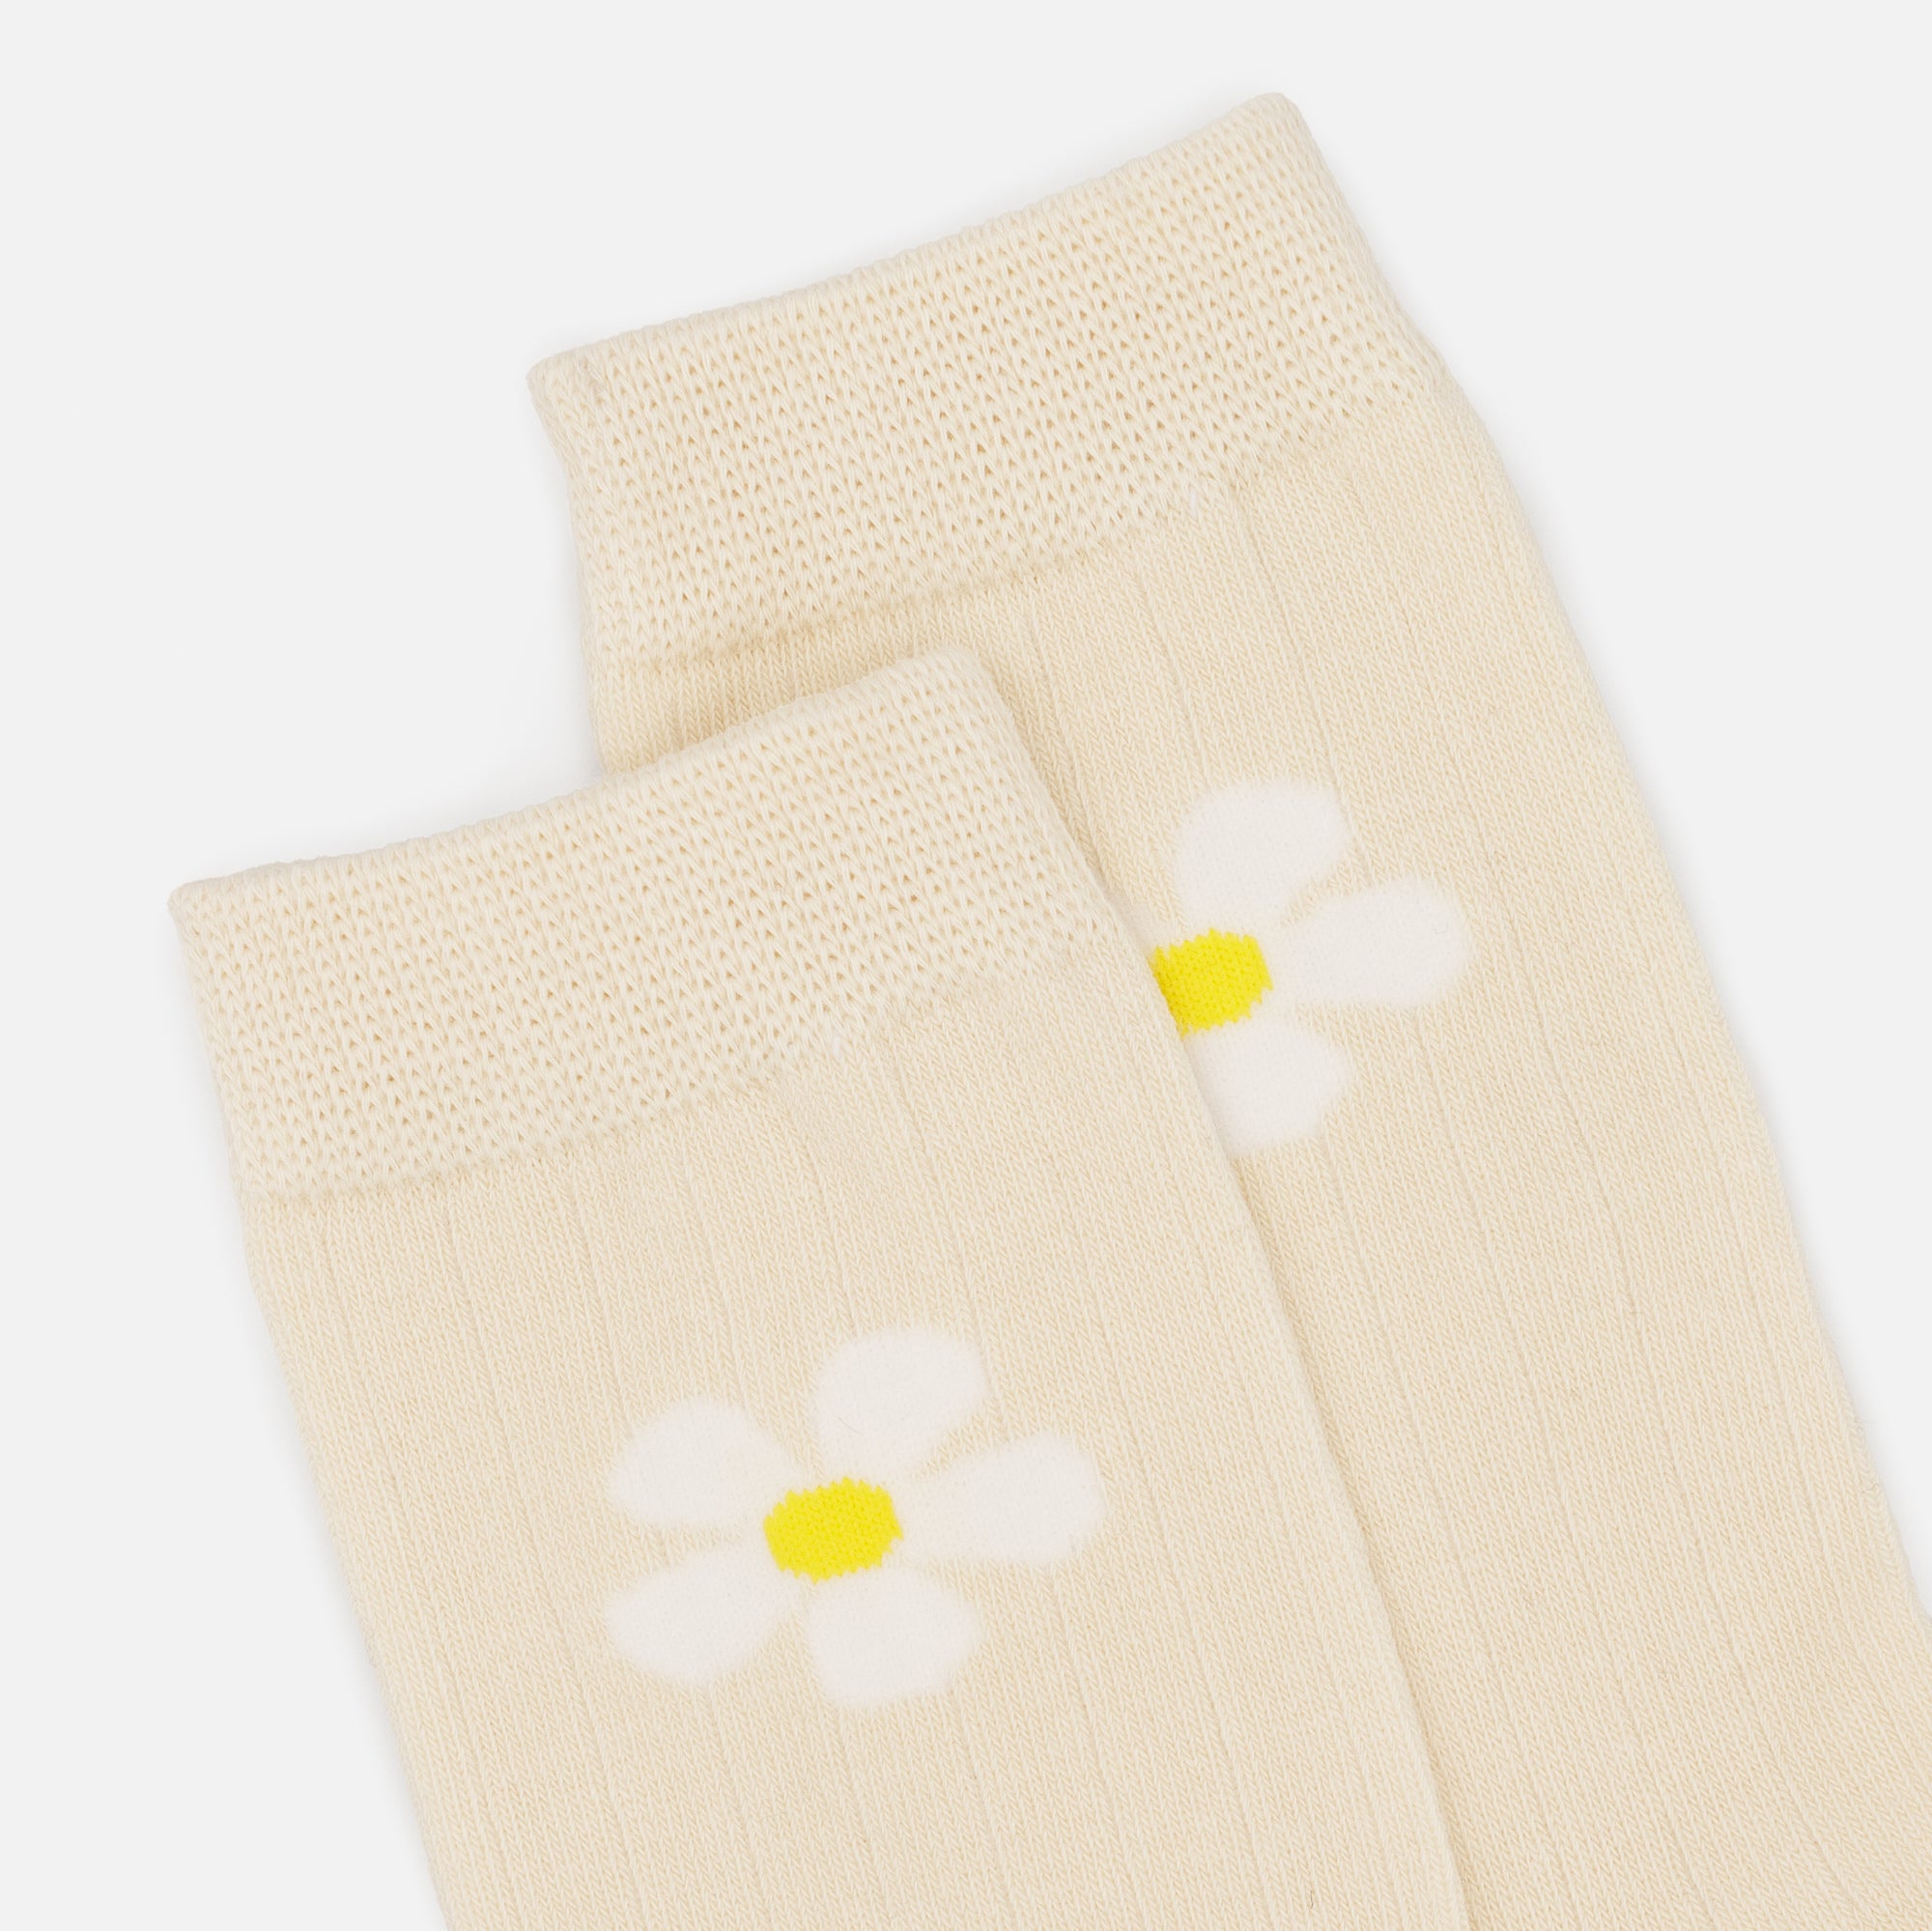 Cream ribbed socks with daisies